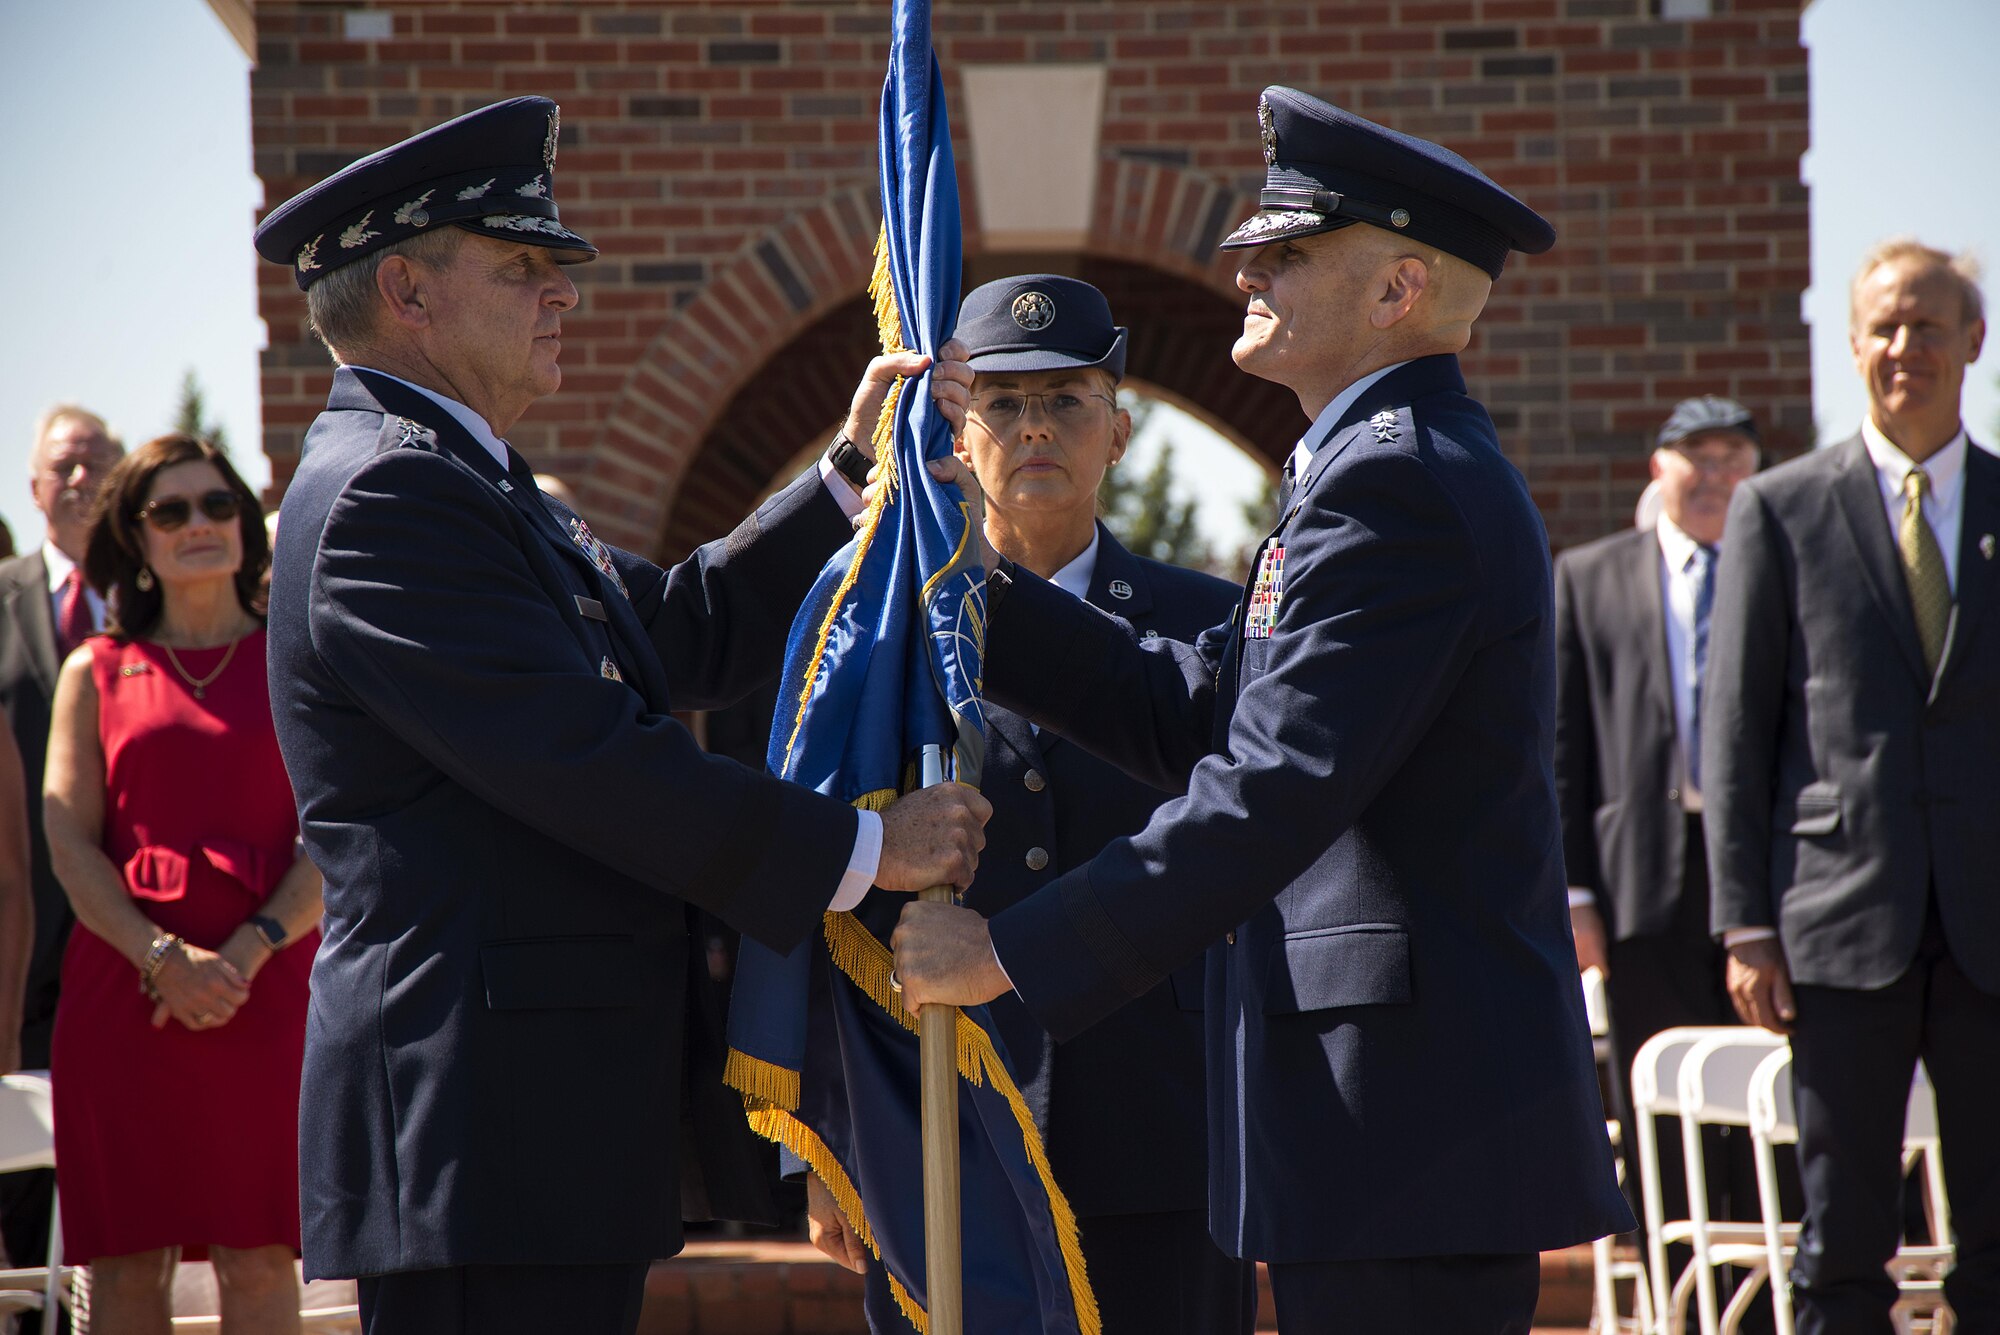 Gen. Mark A. Welsh III, Chief of Staff of the Air Force, passes Air Mobility Command’s guidon to Gen. Carlton D. Everhart II during the AMC’s change of command ceremony at Scott Air Force Base, Illinois, August 11, 2015. Everhart is the 12th commander of AMC since its activation June 1, 1992. Everhart was previously the 18th Air Force Commander here. (U.S. Air Force photo/ Senior Airman Jake Eckhardt)